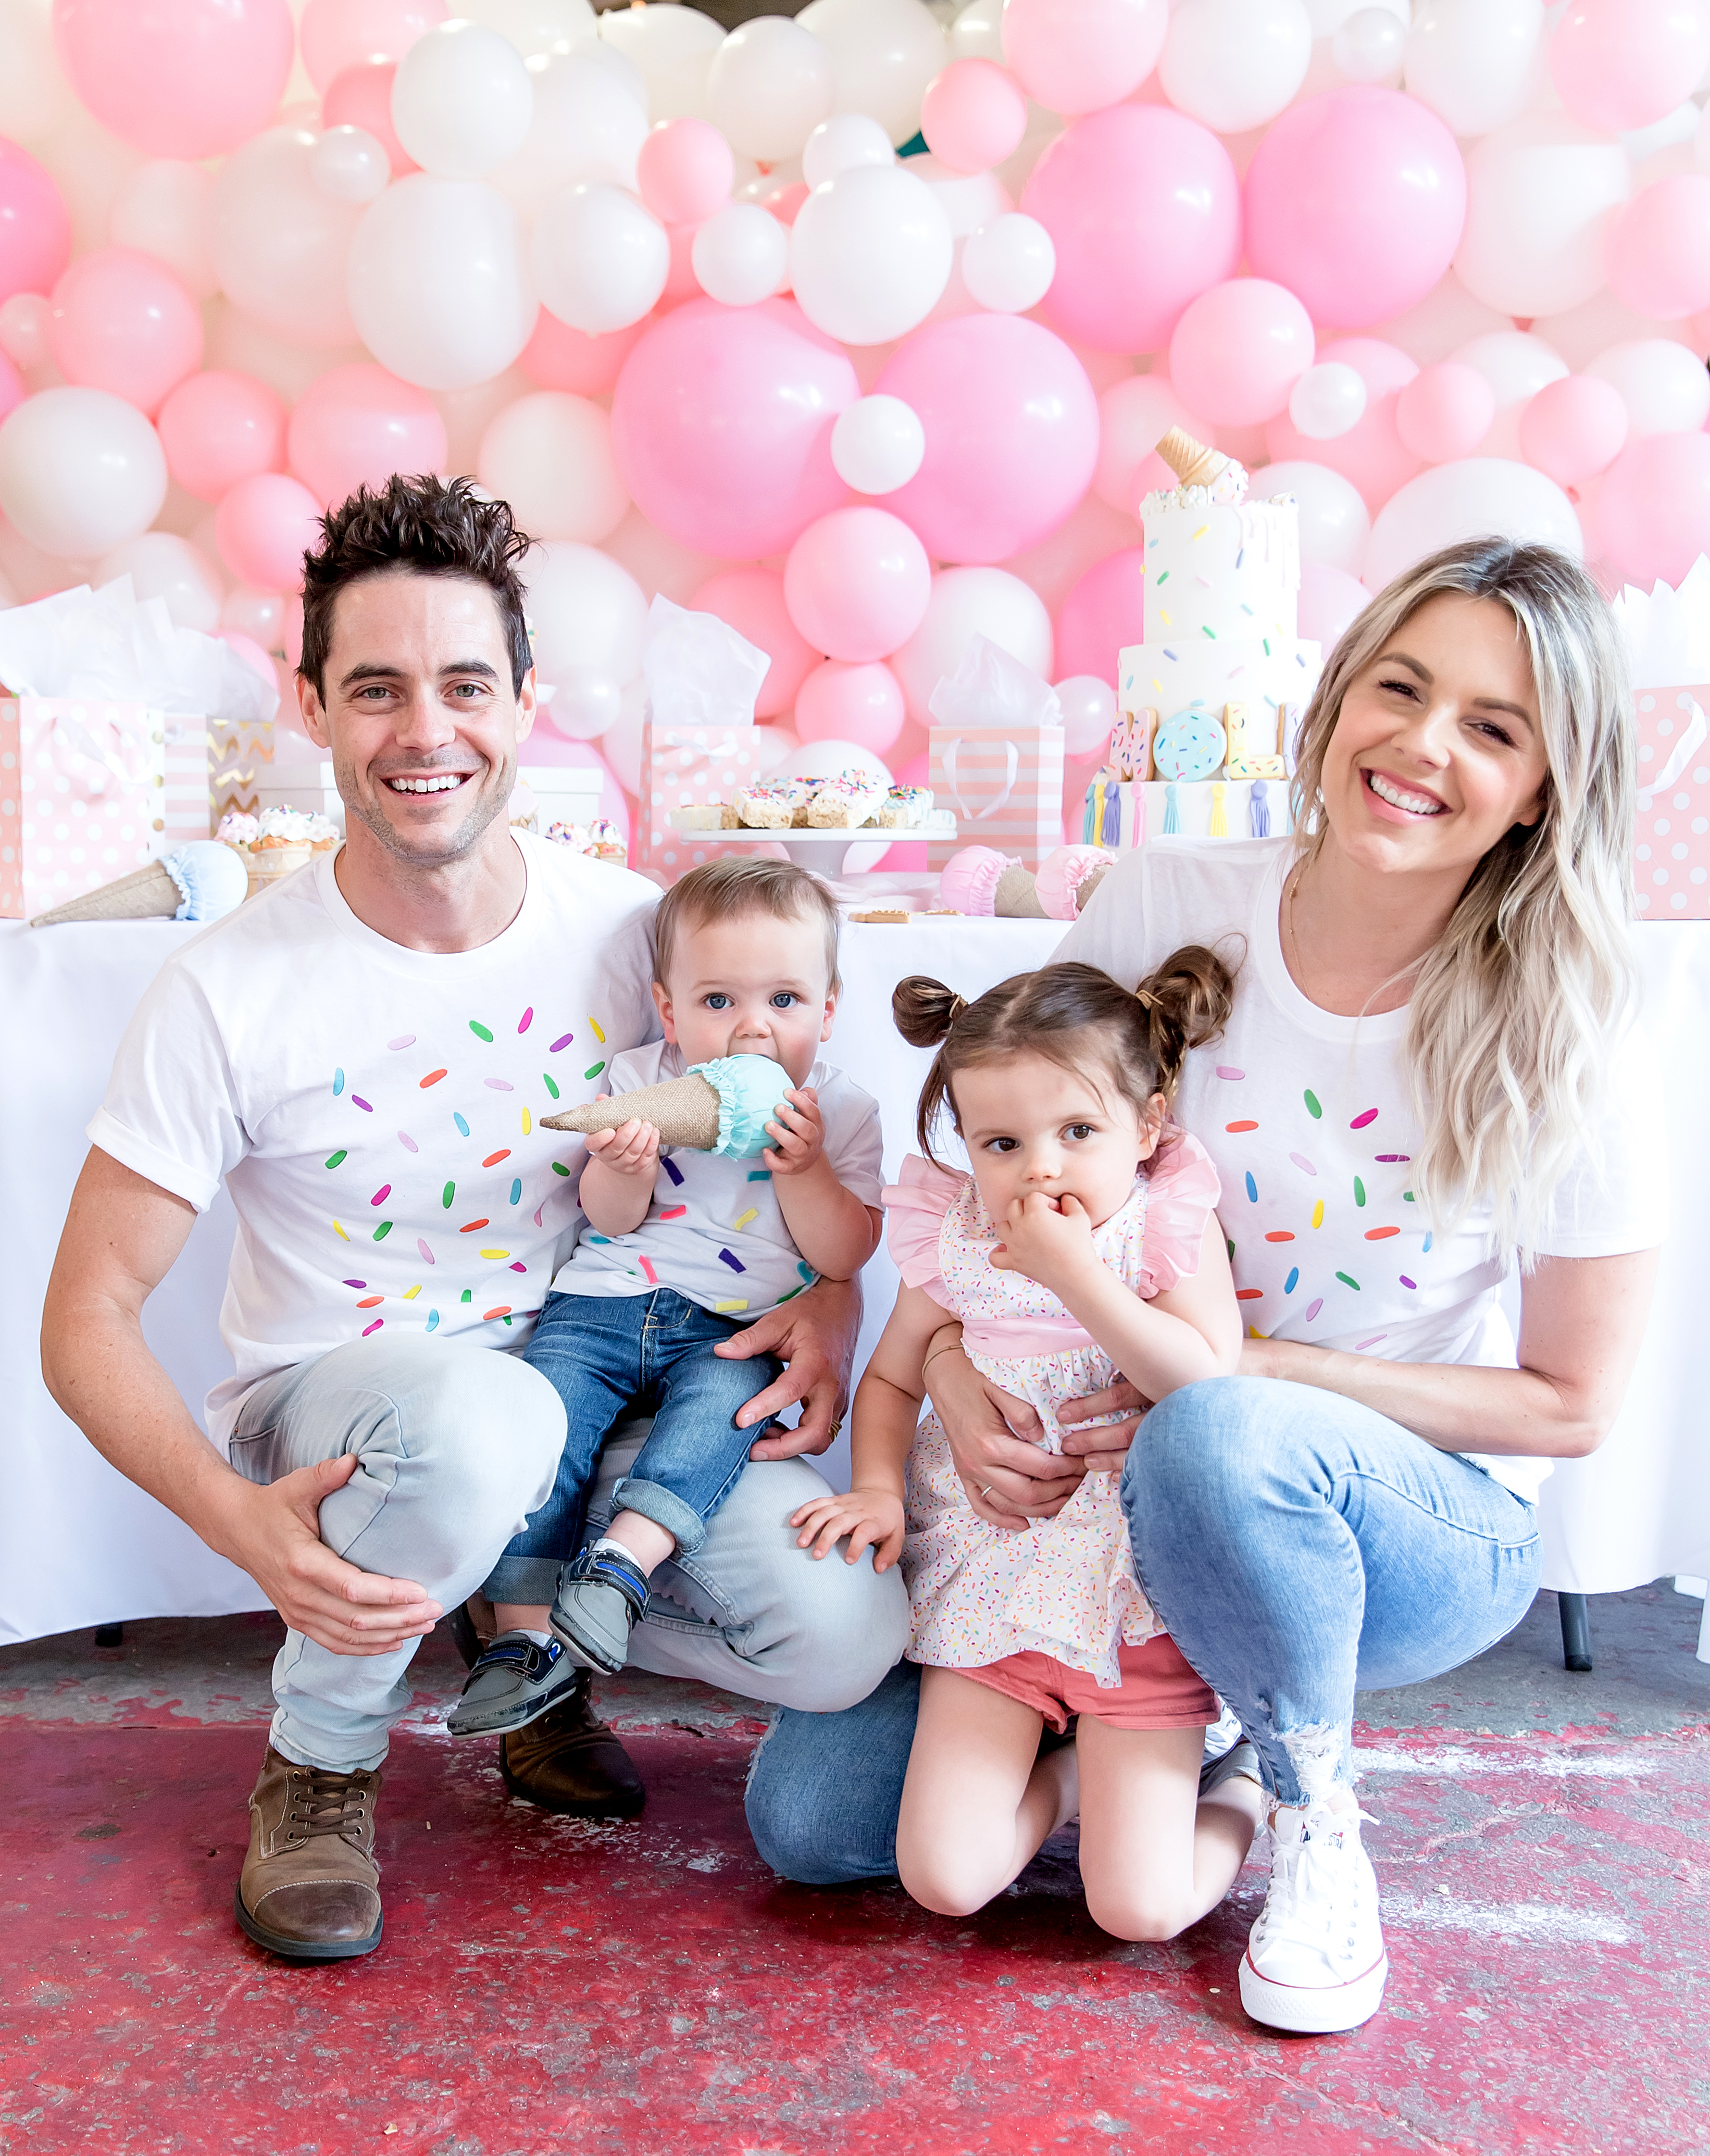 Ali Fedotowsky-Manno Had an Adorable Family Photo Shoot to Reveal